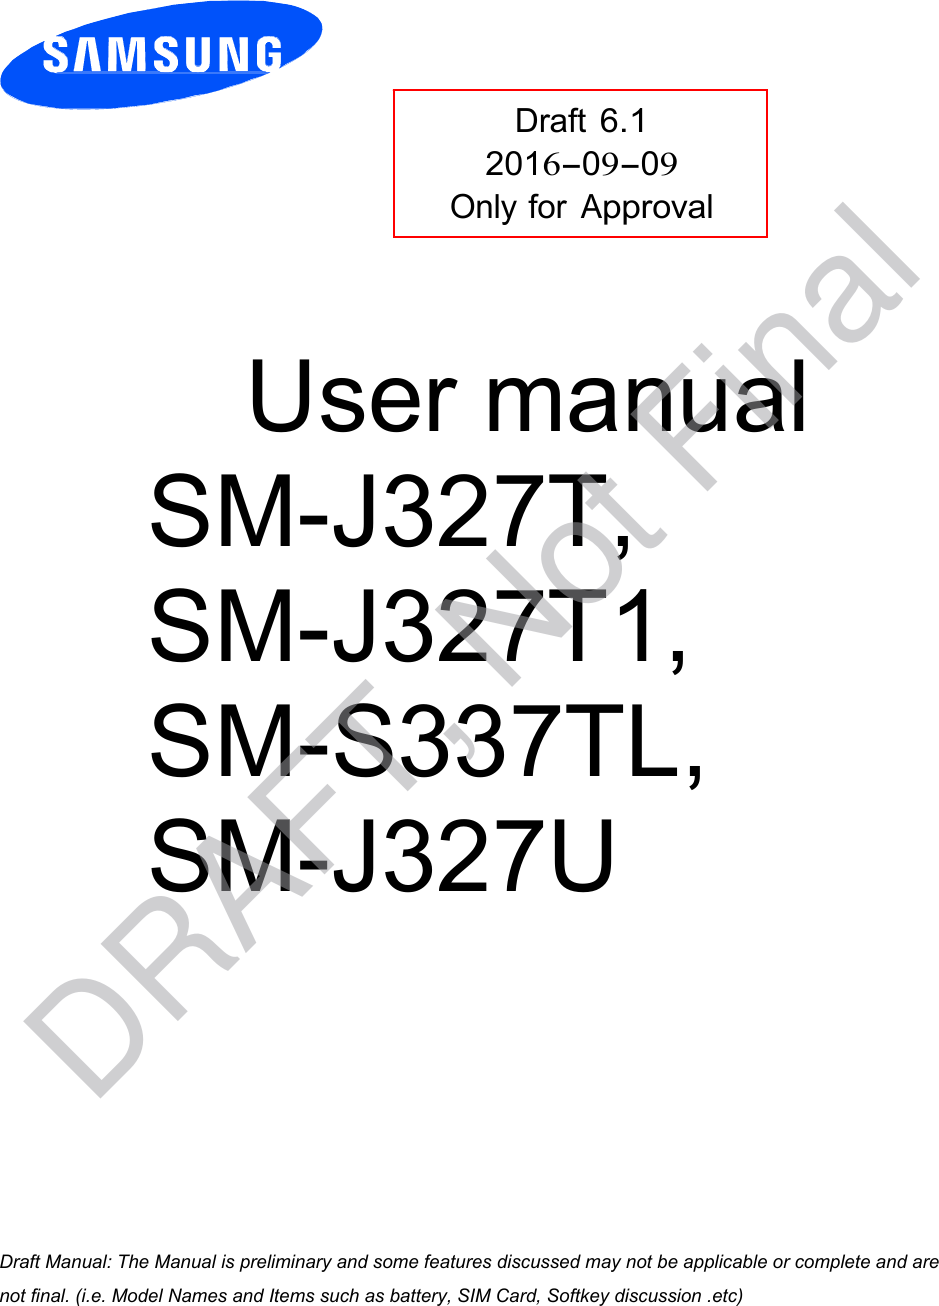 Draft 6.1 2016-09-09 Only for Approval User manual SM-J327T,SM-J327T1,SM-S337TL, SM-J327Ua ana  ana  na and  a dd a n  aa   and a n na  d a and   a a  ad  dn DRAFT, Not Final